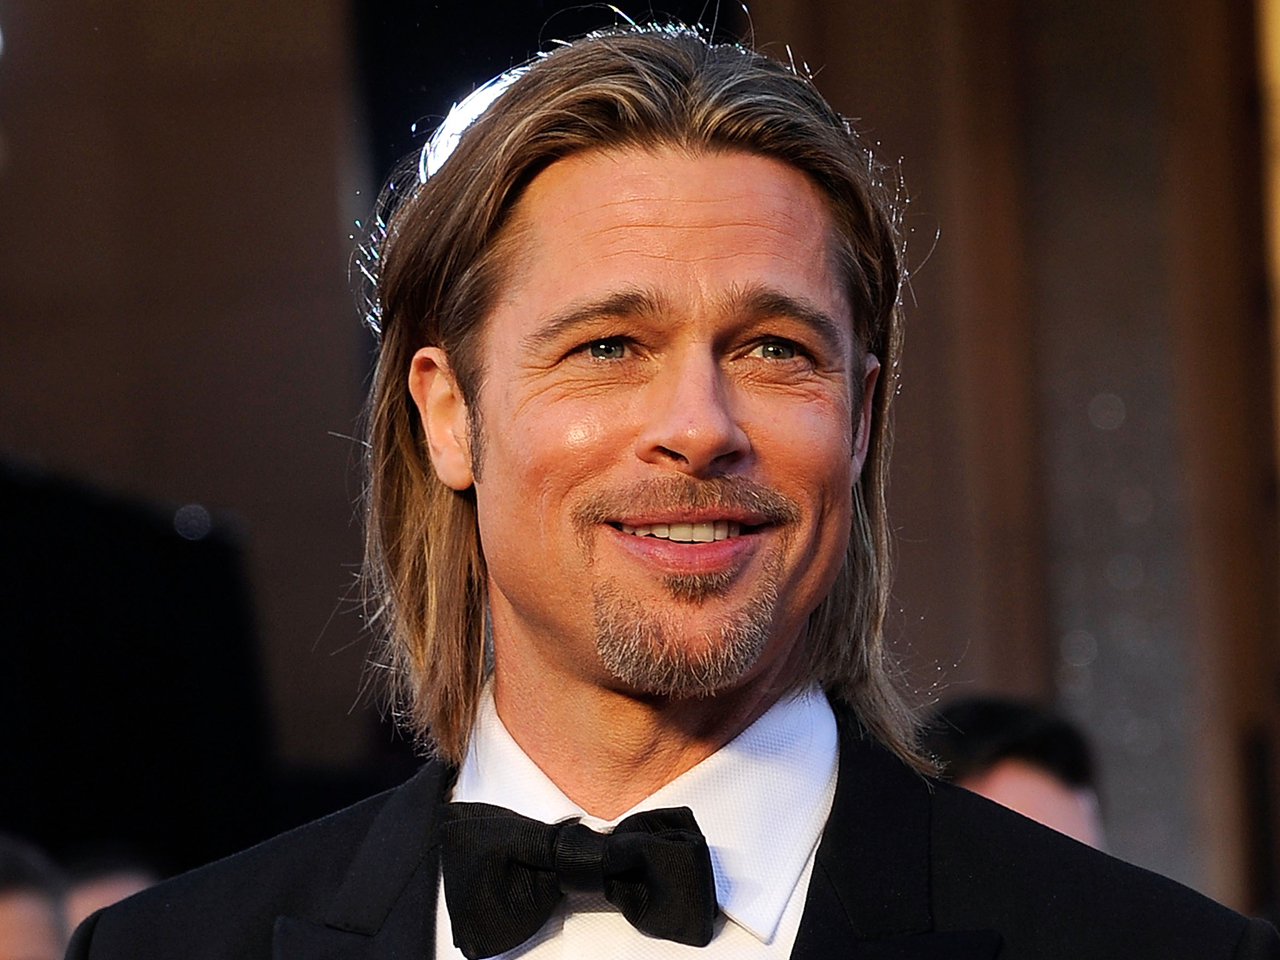 Brad Pitt's First Chanel No.5 Campaign is Here, But We Want Something More  – StyleCaster